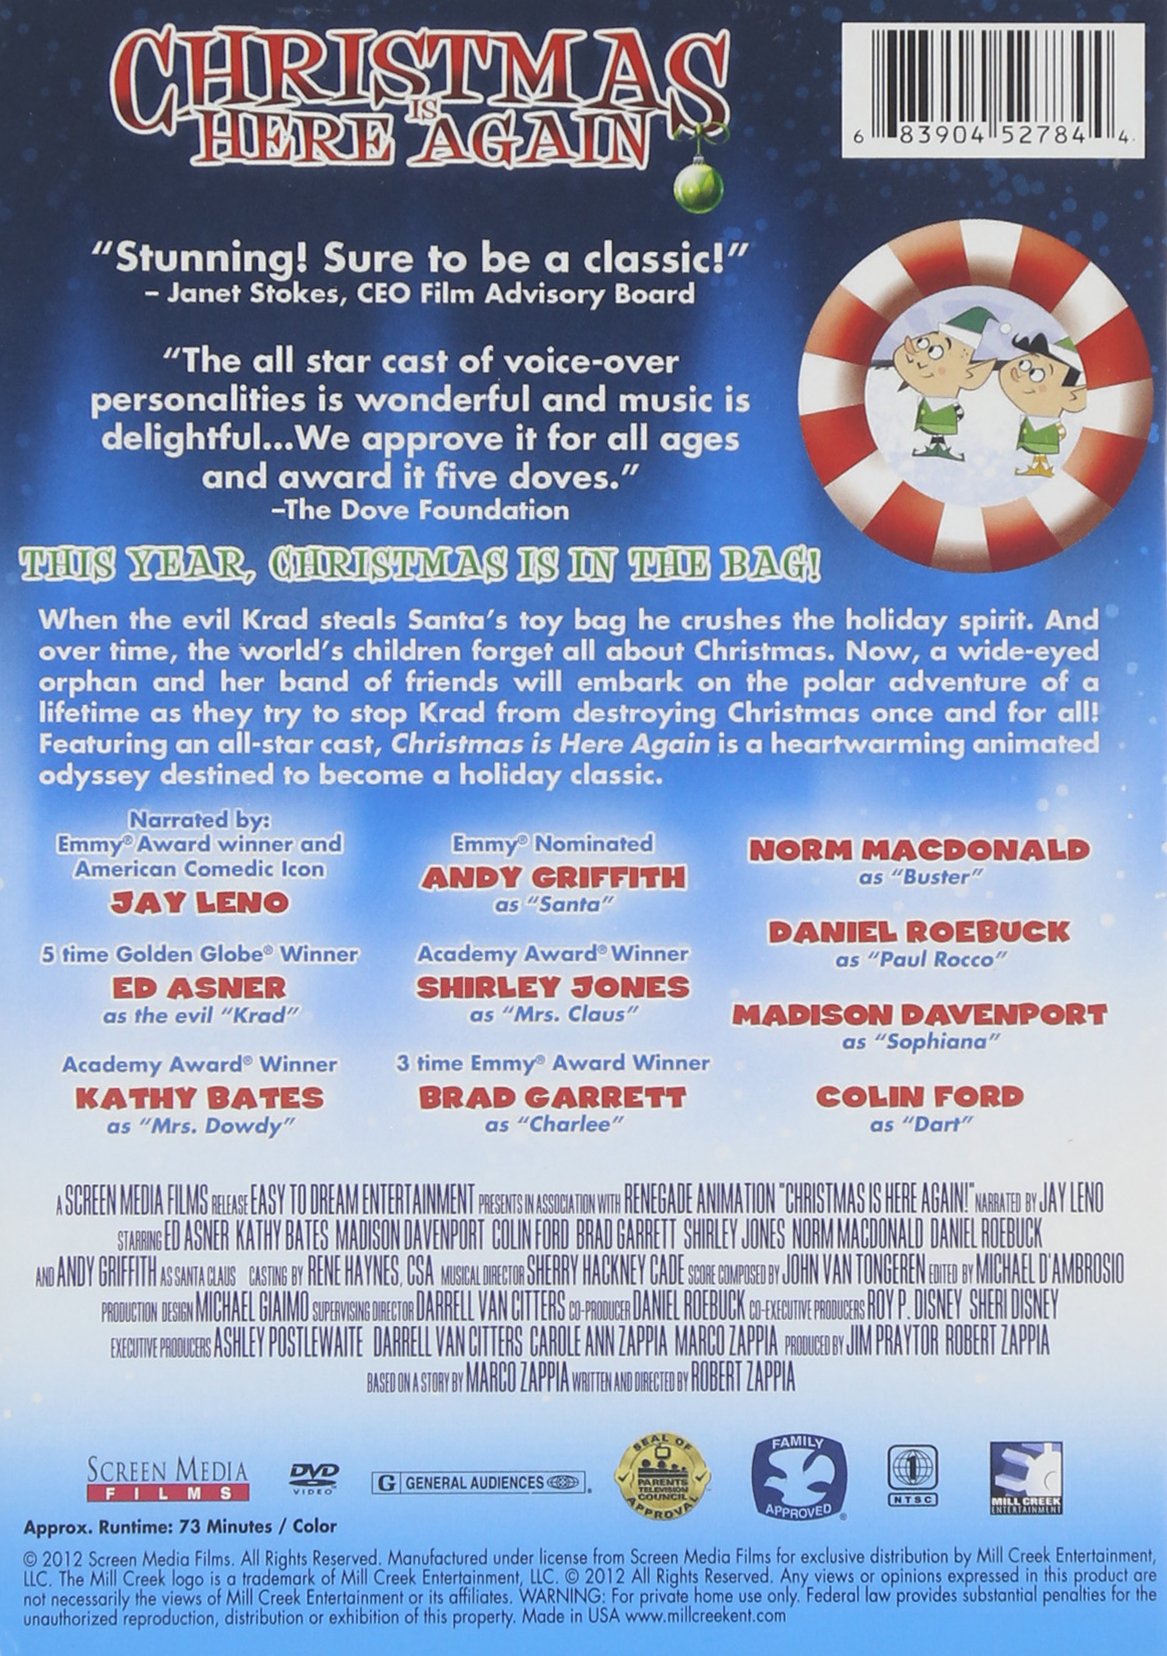 Christmas Is Here Again - Feature Film DVD (DVD) - image 2 of 2